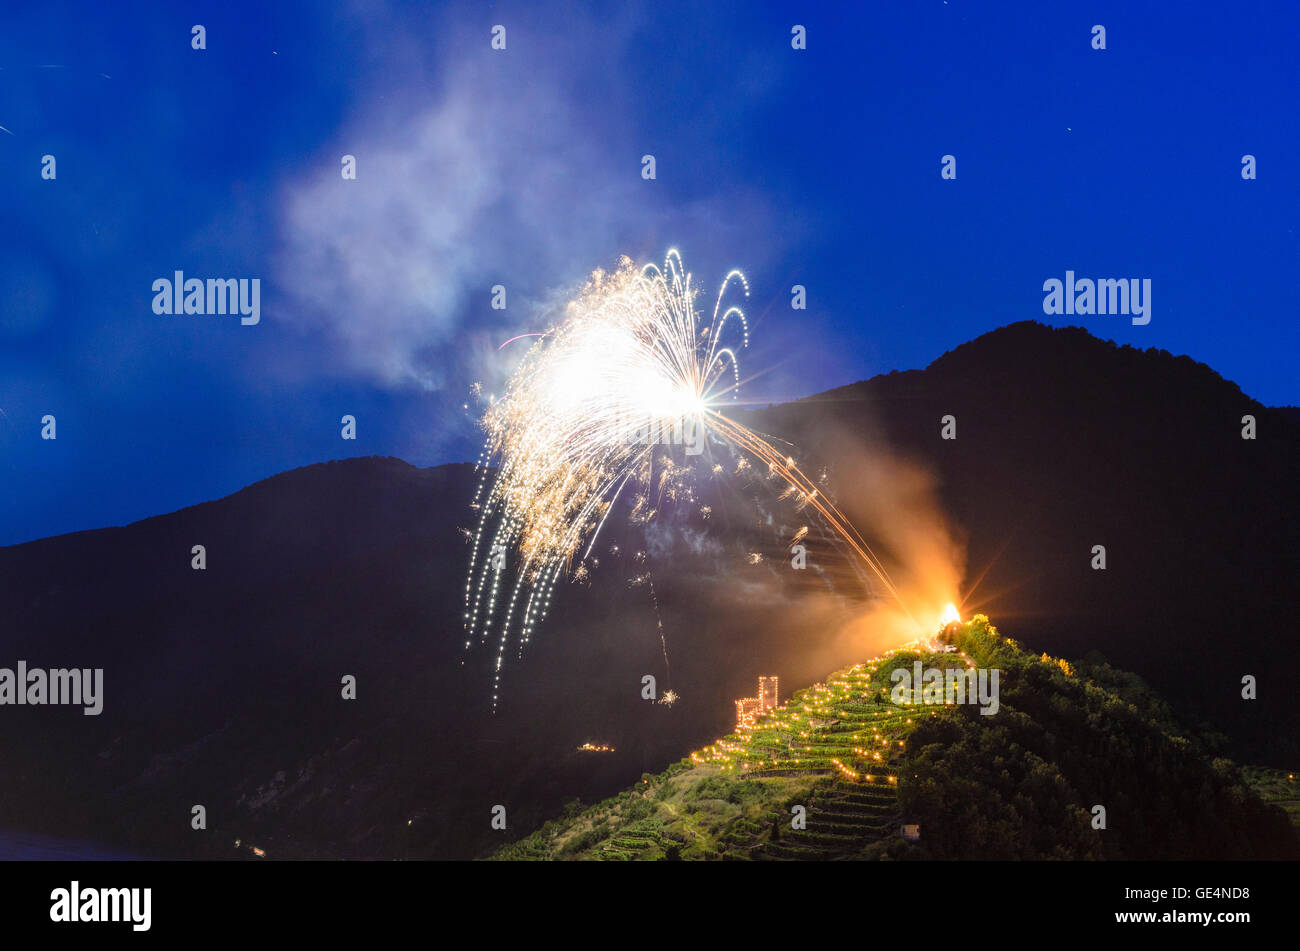 Spitz an der Donau: 1000 bucket Mountain and the castle ruin Hinterhaus during the midsummer festival with torches in the vineya Stock Photo